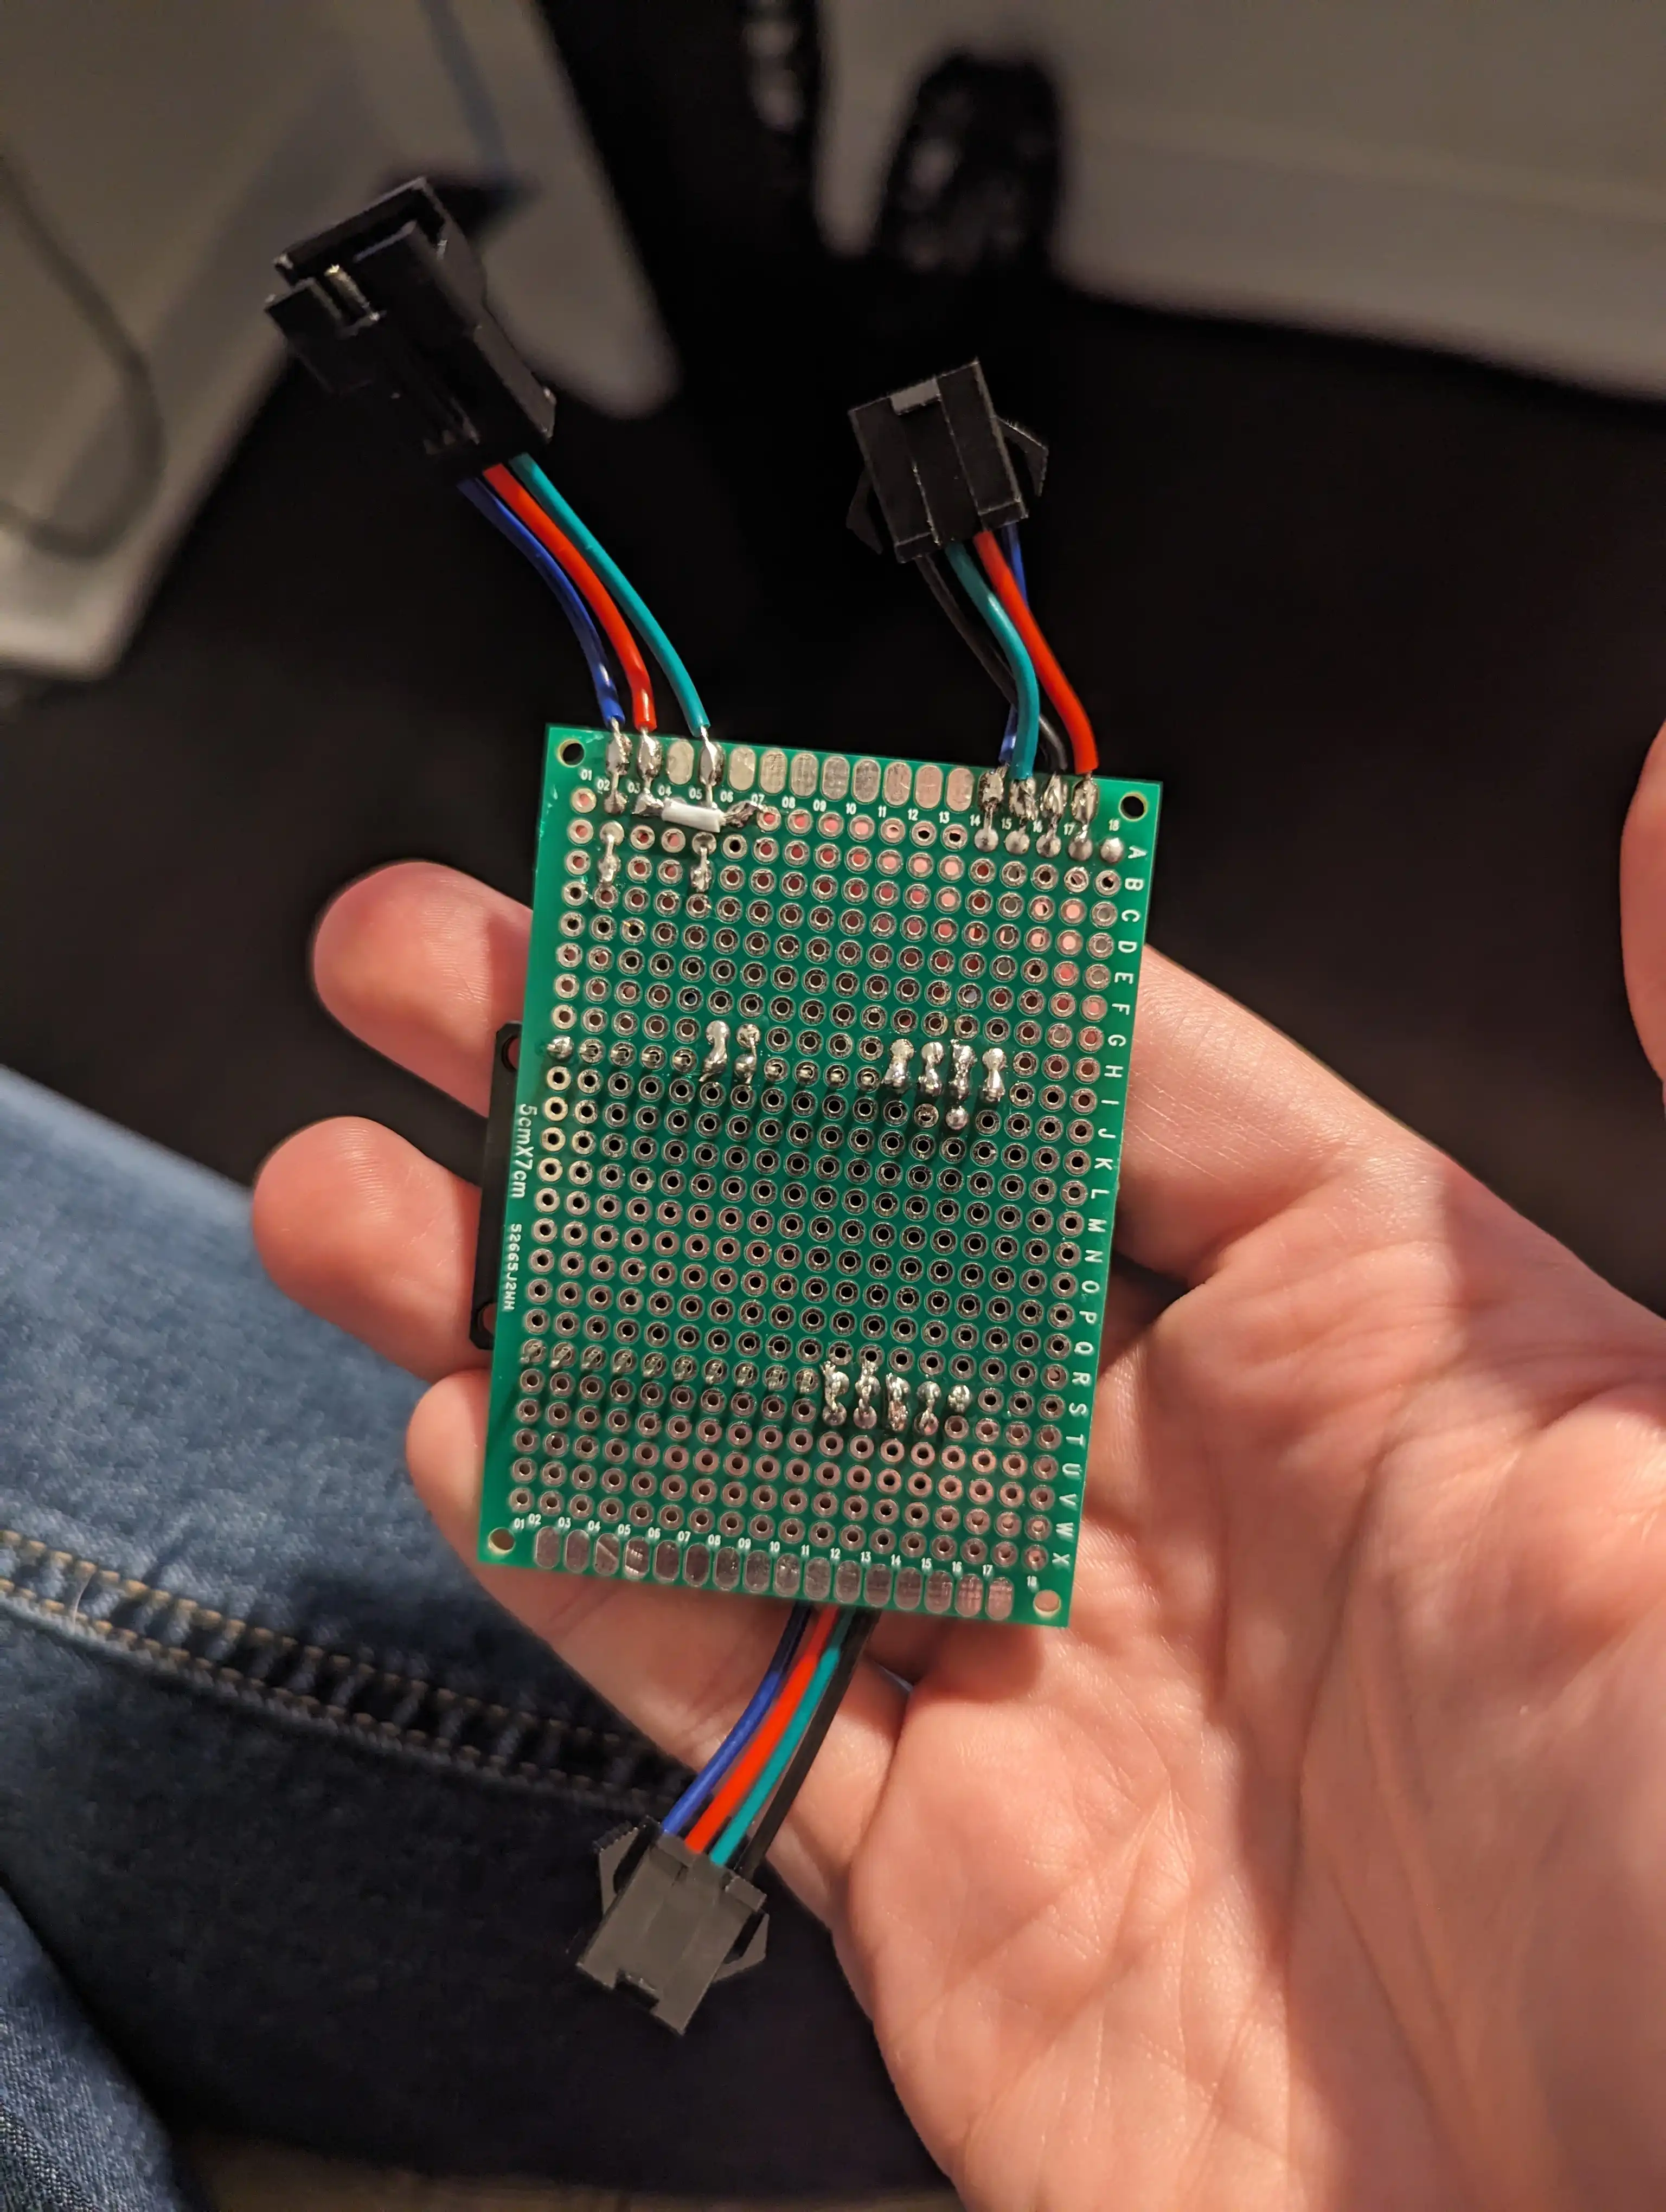 A photo of the back of a protoboard with the same wiring as the breadboard